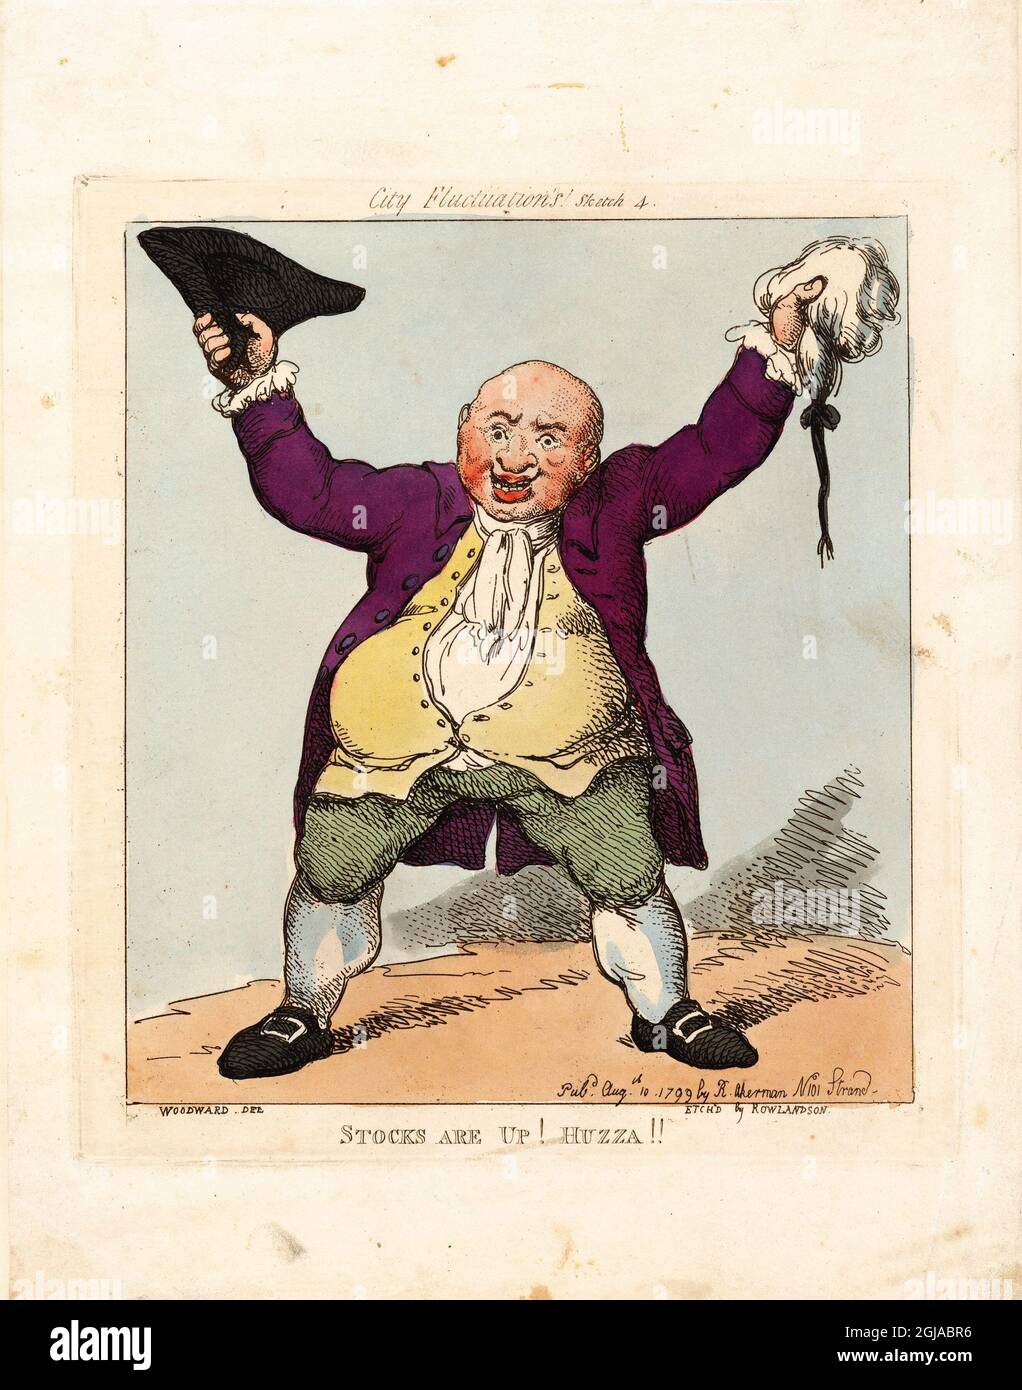 Stocks are Up, Huzza! 1799 Artist: Thomas Rowlandson (1756-1827) an English artist and caricaturist of the Georgian Era. A social observer, he was a prolific artist and print maker.  Credit: Thomas Rowlandson/Alamy Stock Photo